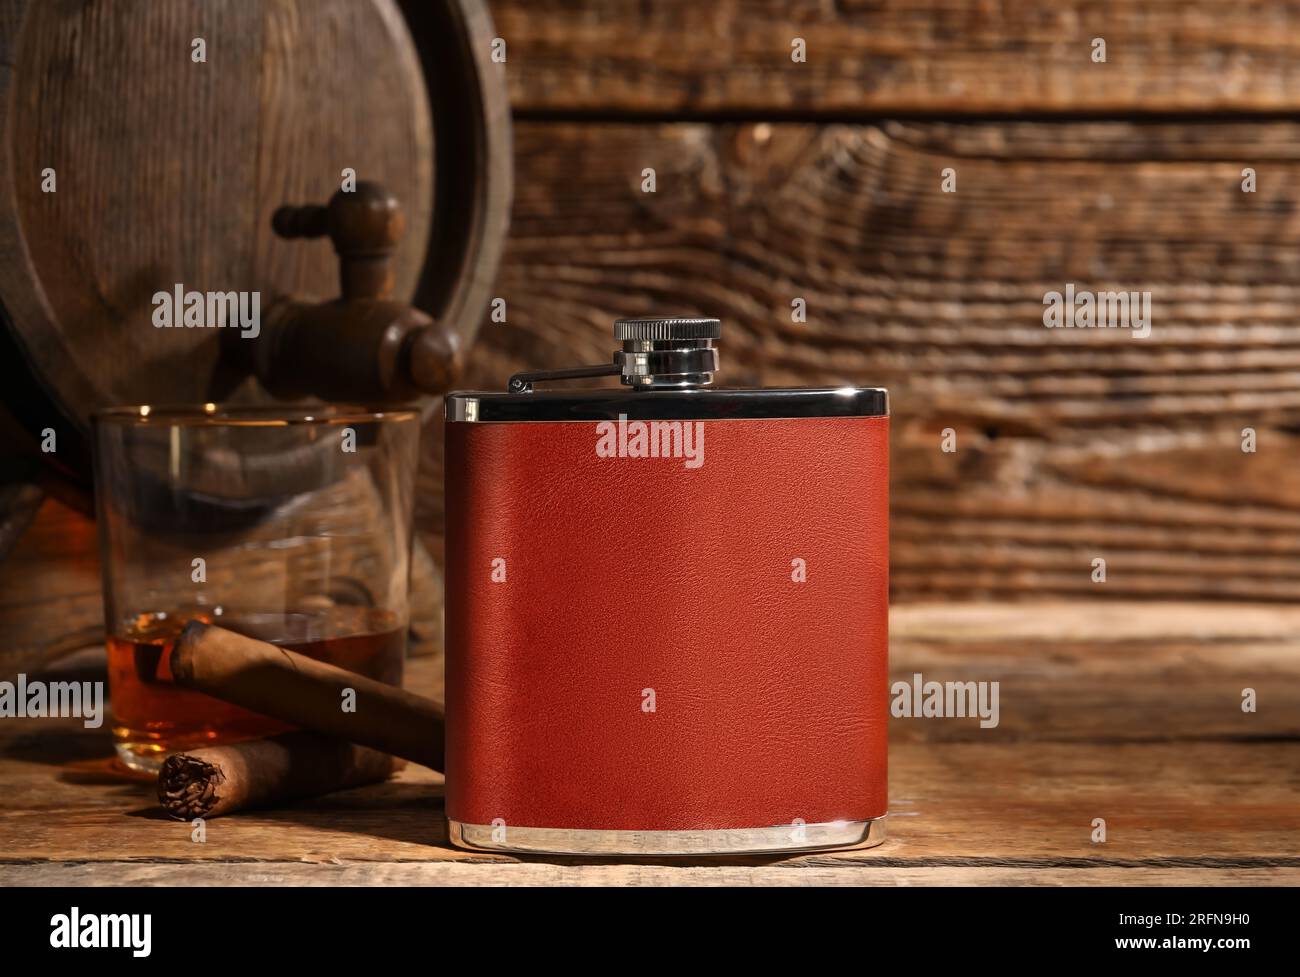 New hip flask on wooden background Stock Photo